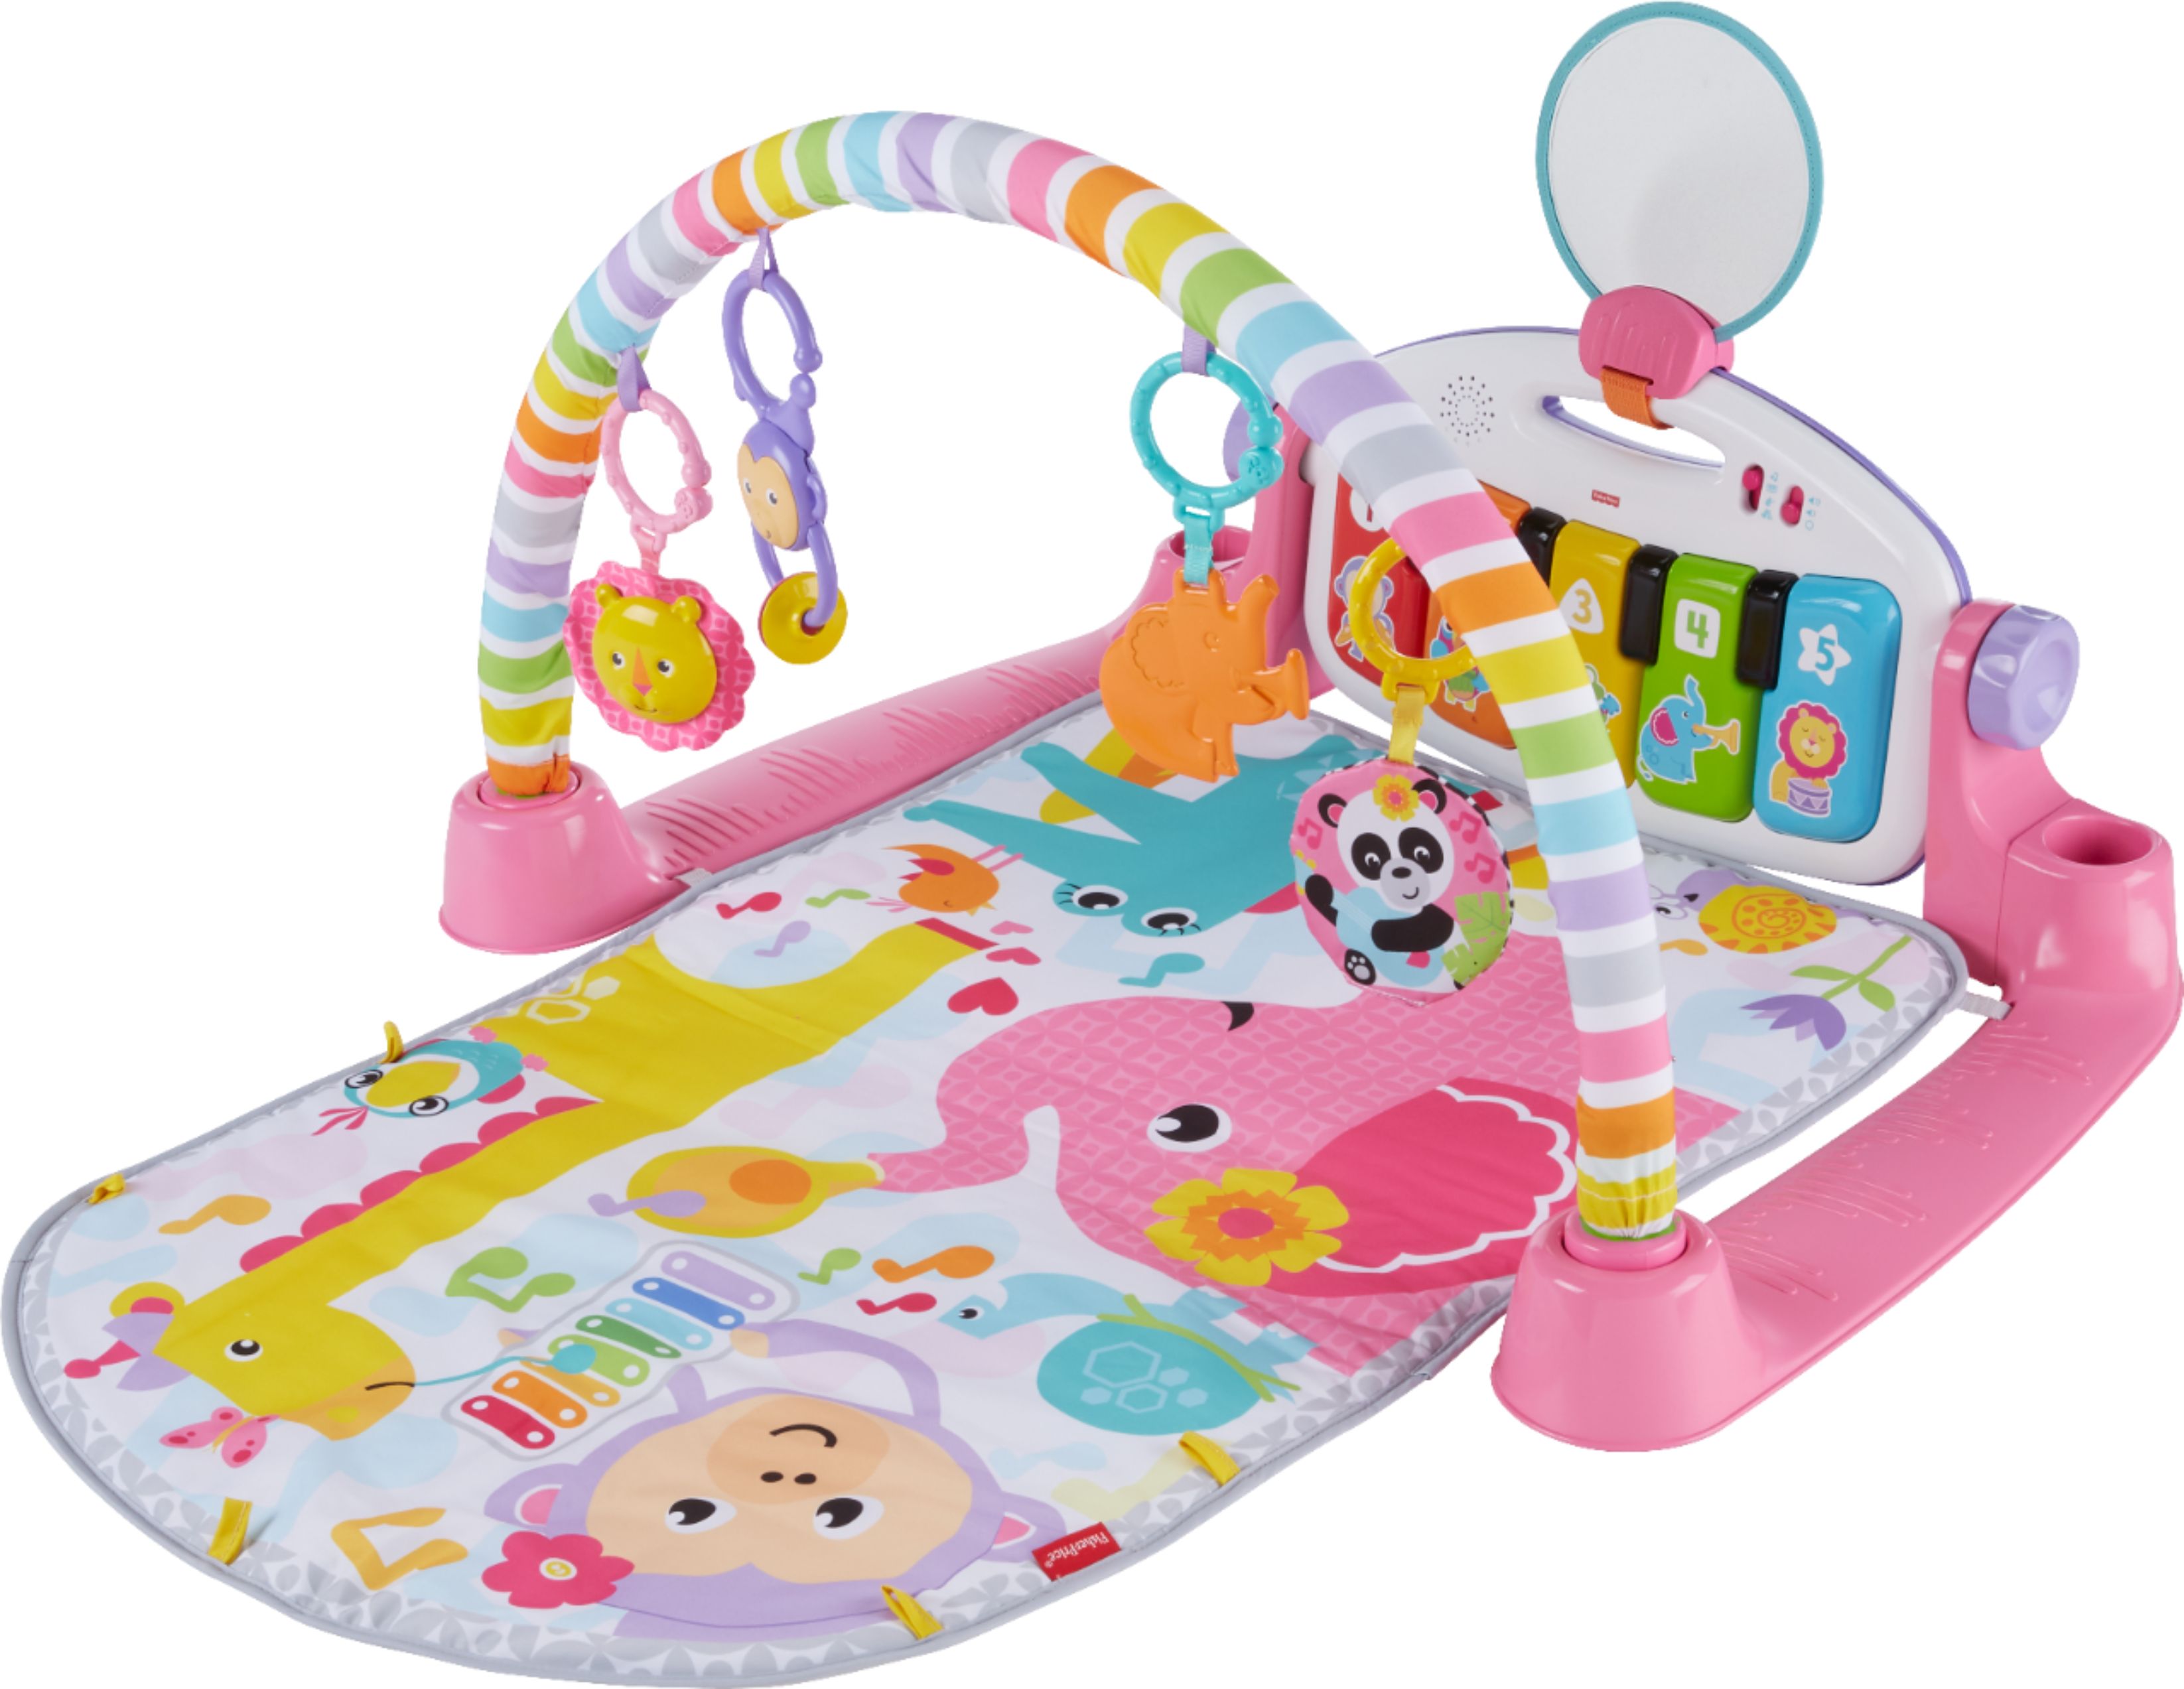 Left View: Fisher-Price Deluxe Kick 'n Play Piano Gym, Pink